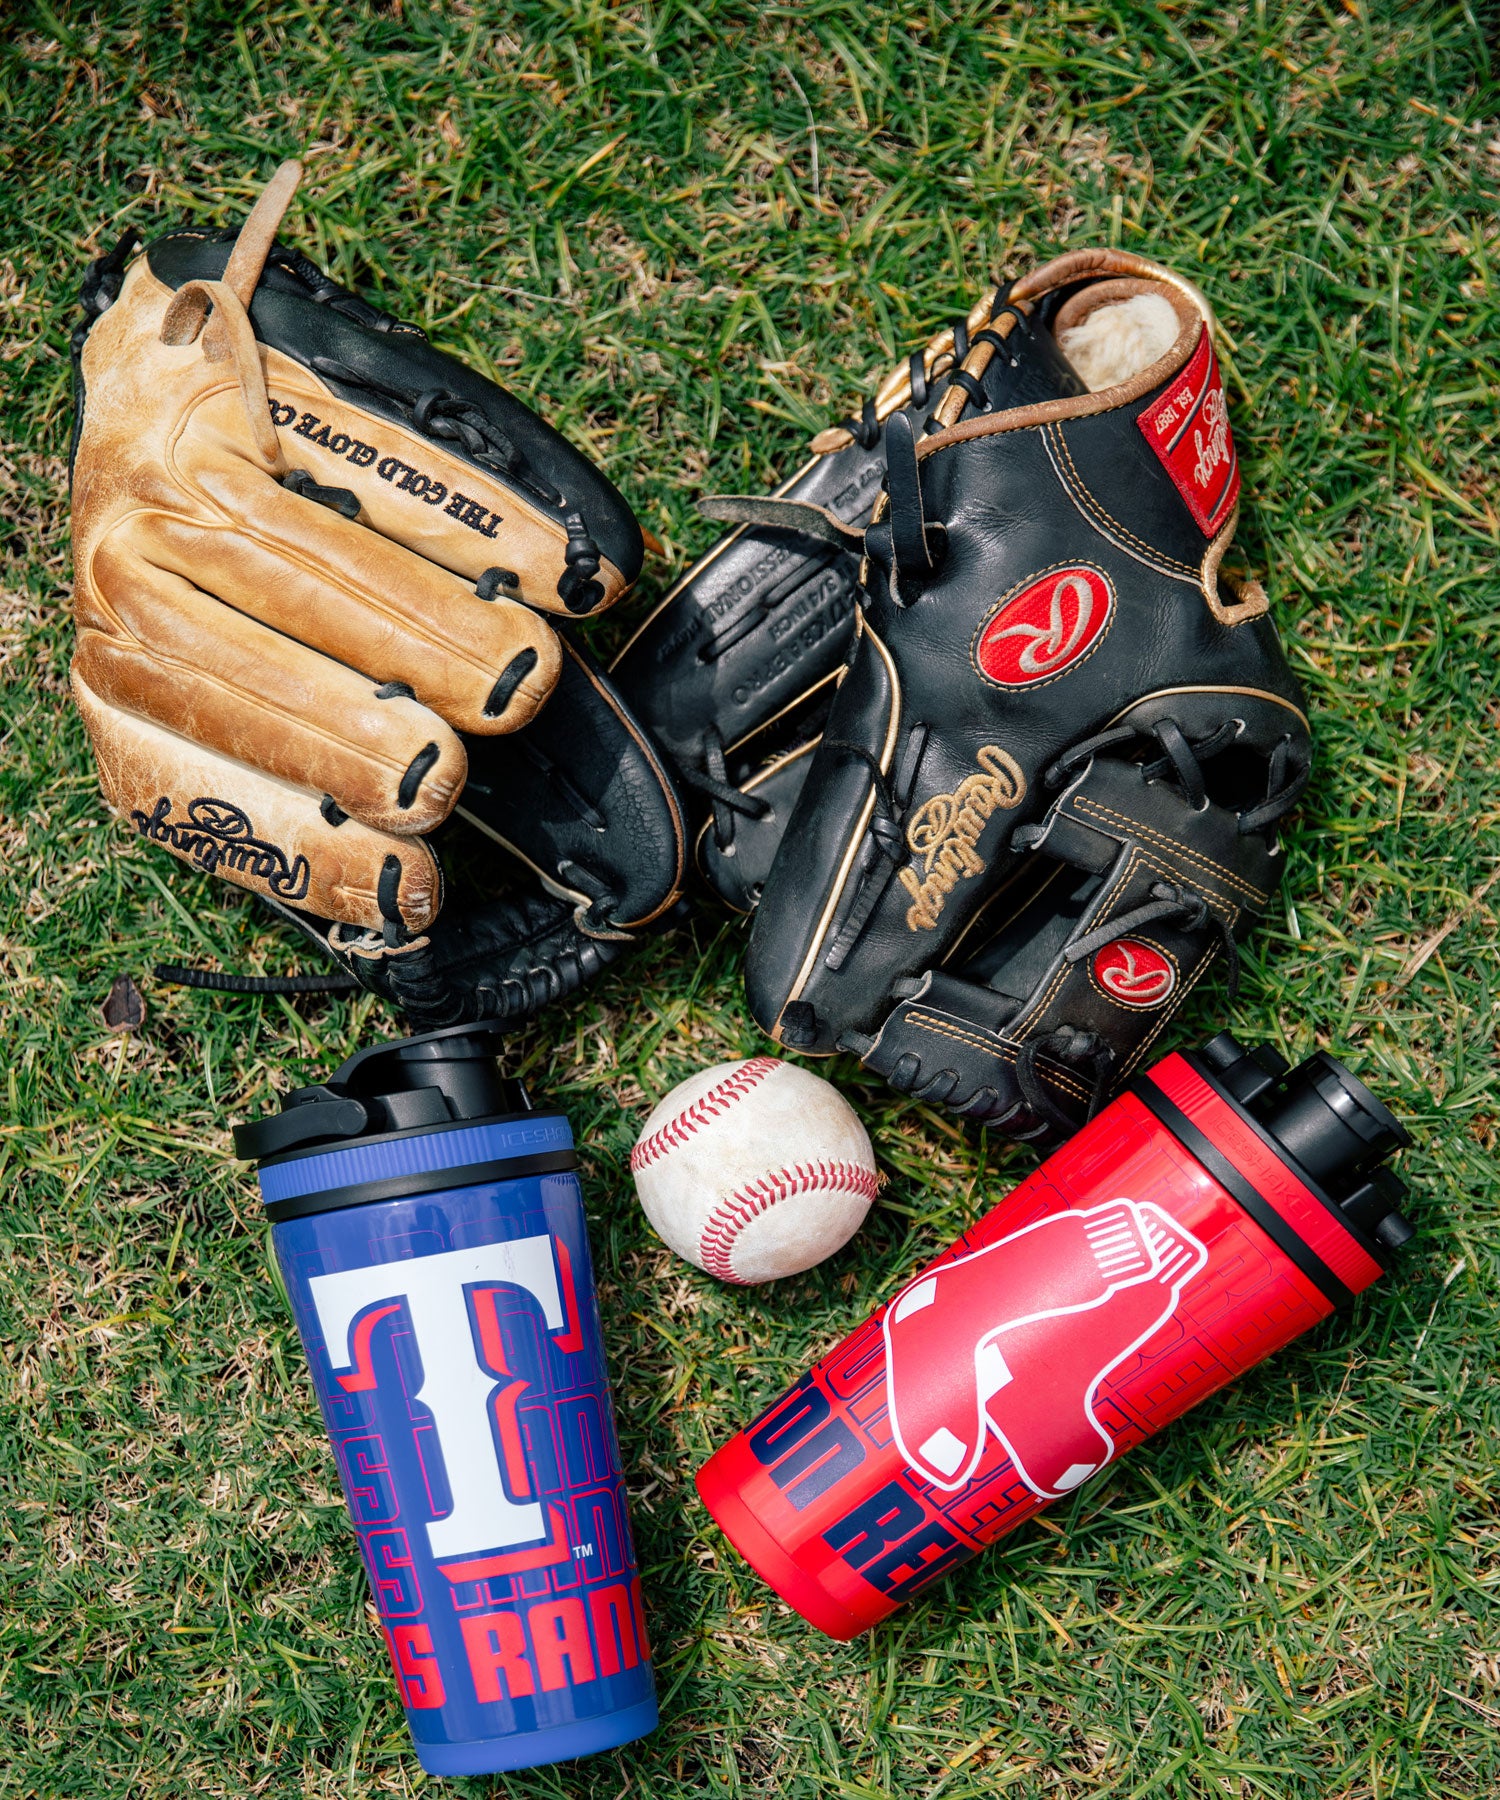 An image of Texas Rangers 4D 26oz Ice shaker and a Boston Red Sox 4D 26oz Ice shaker laying on grass next to two baseball gloves and a baseball.